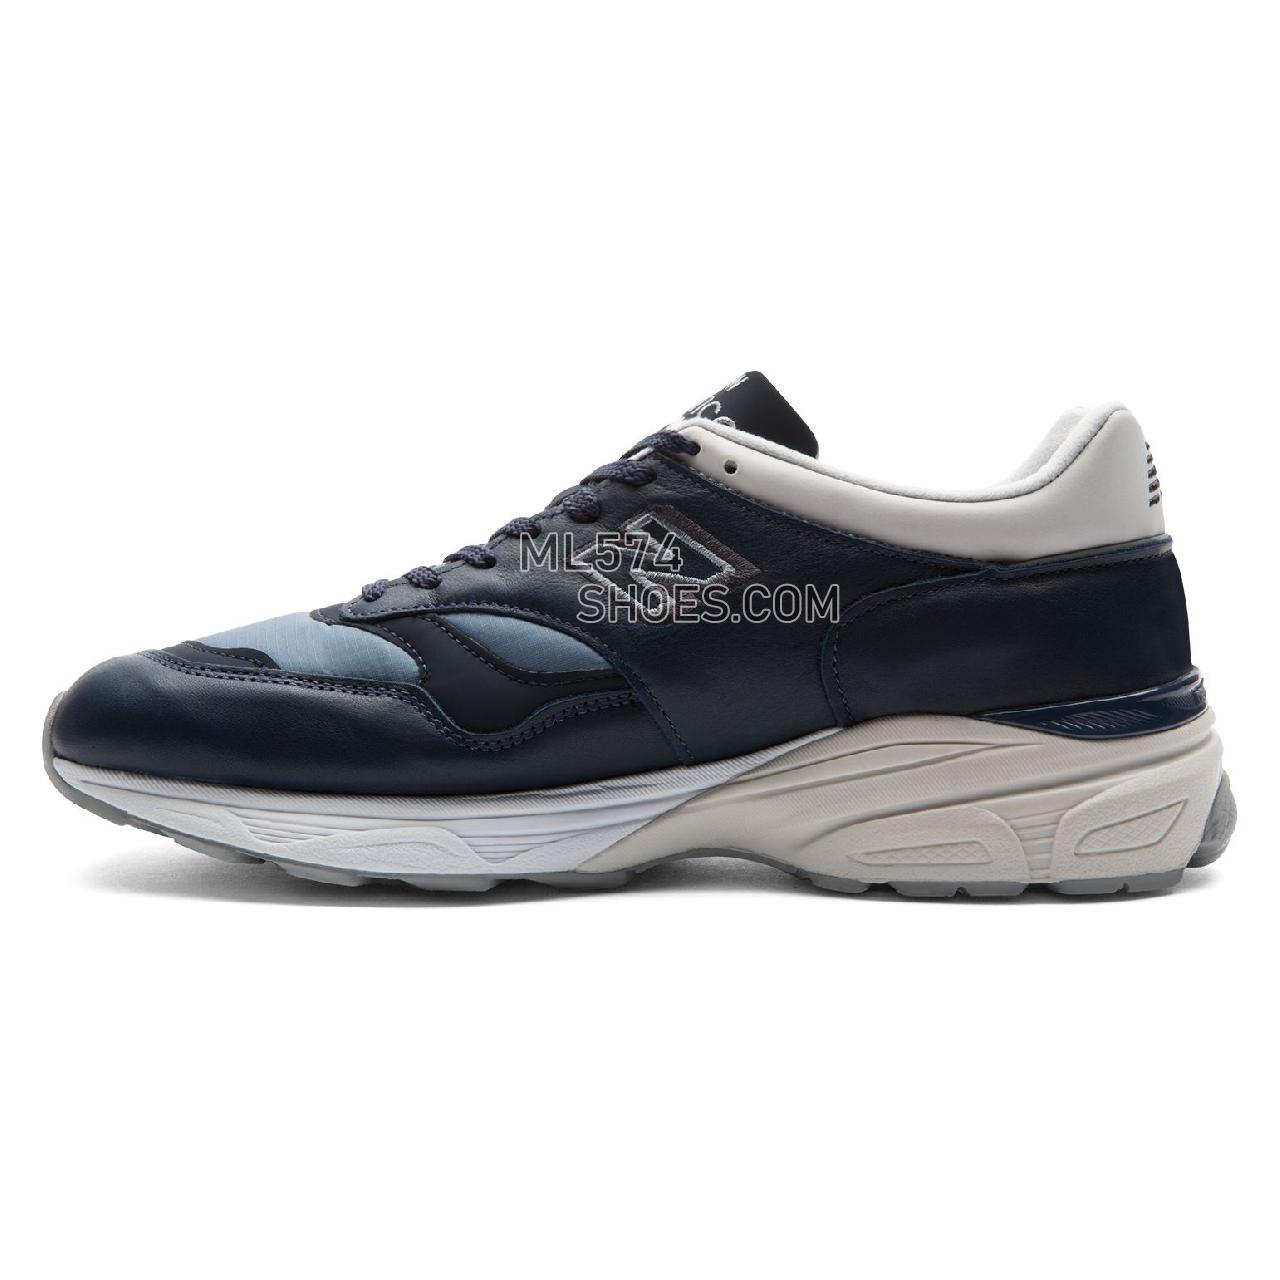 New Balance Made in UK 1500.9 - Men's 1500.9 Made in UK Classic M1500-LN - Dark Blue with Navy and Grey - M15009LP